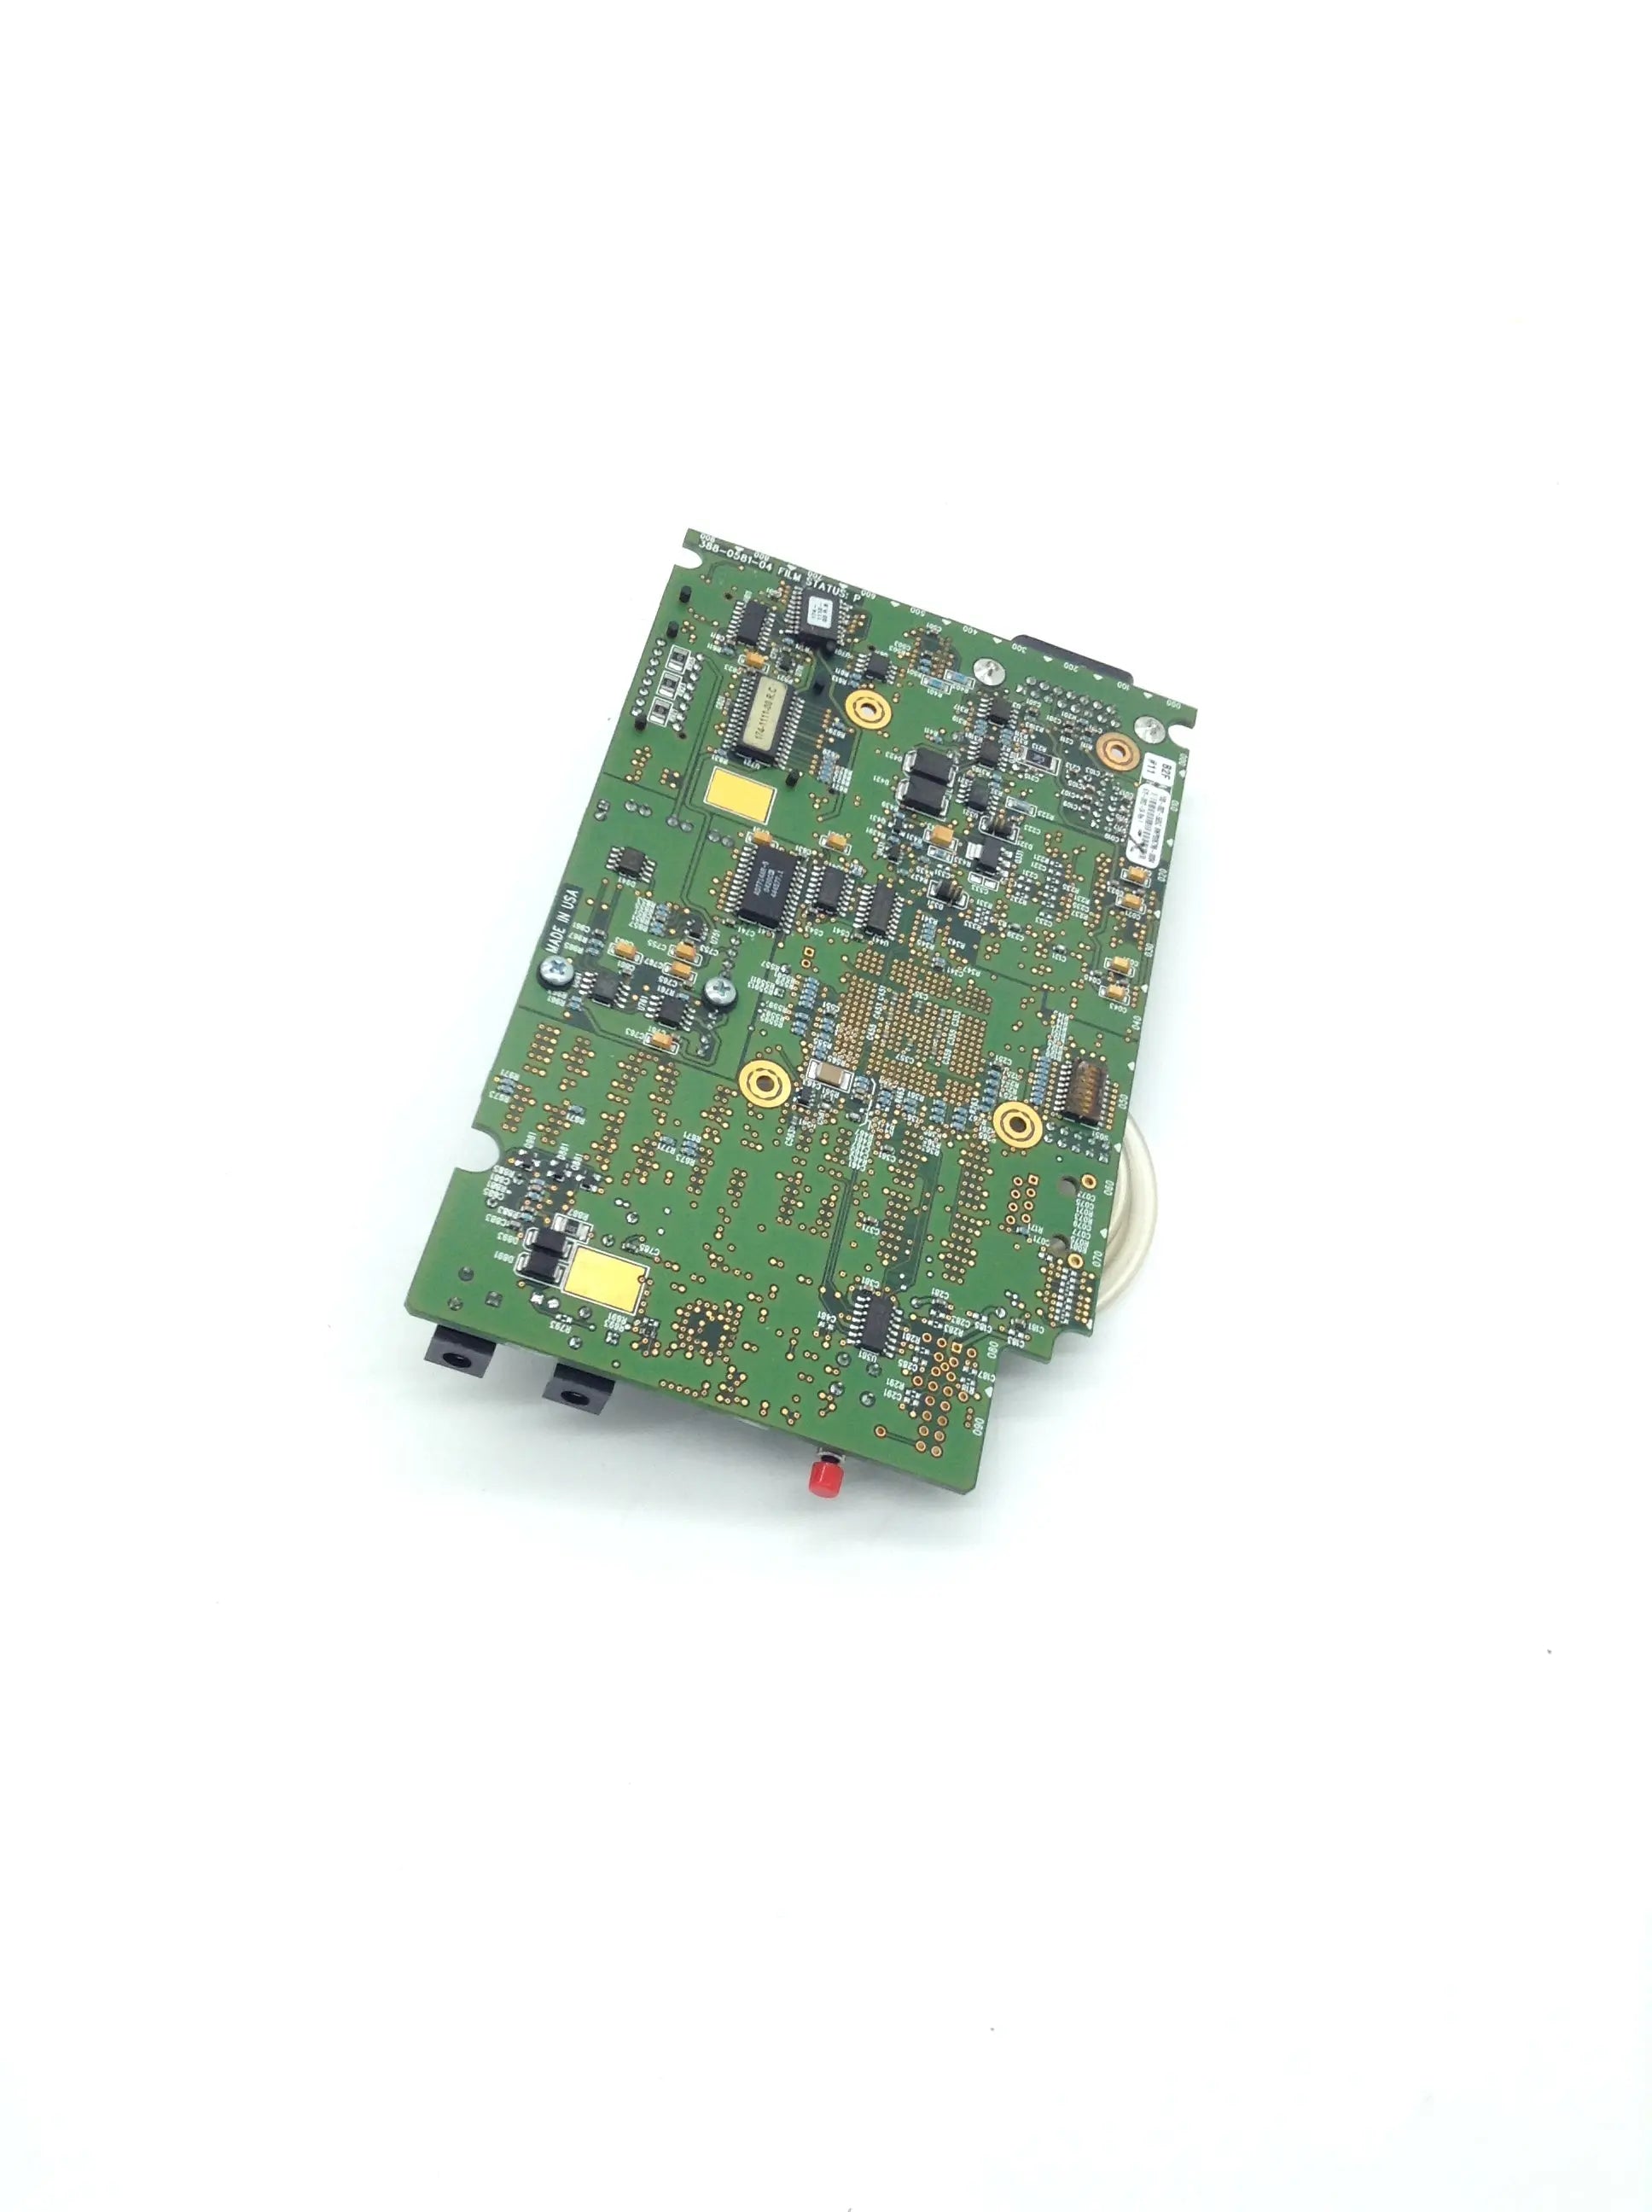 Load image into Gallery viewer, A Biomedical Service Spacelabs 90496 Multi Parameter Module MPC860 CPU/NiBP PCB Assembly 670-0982-00 